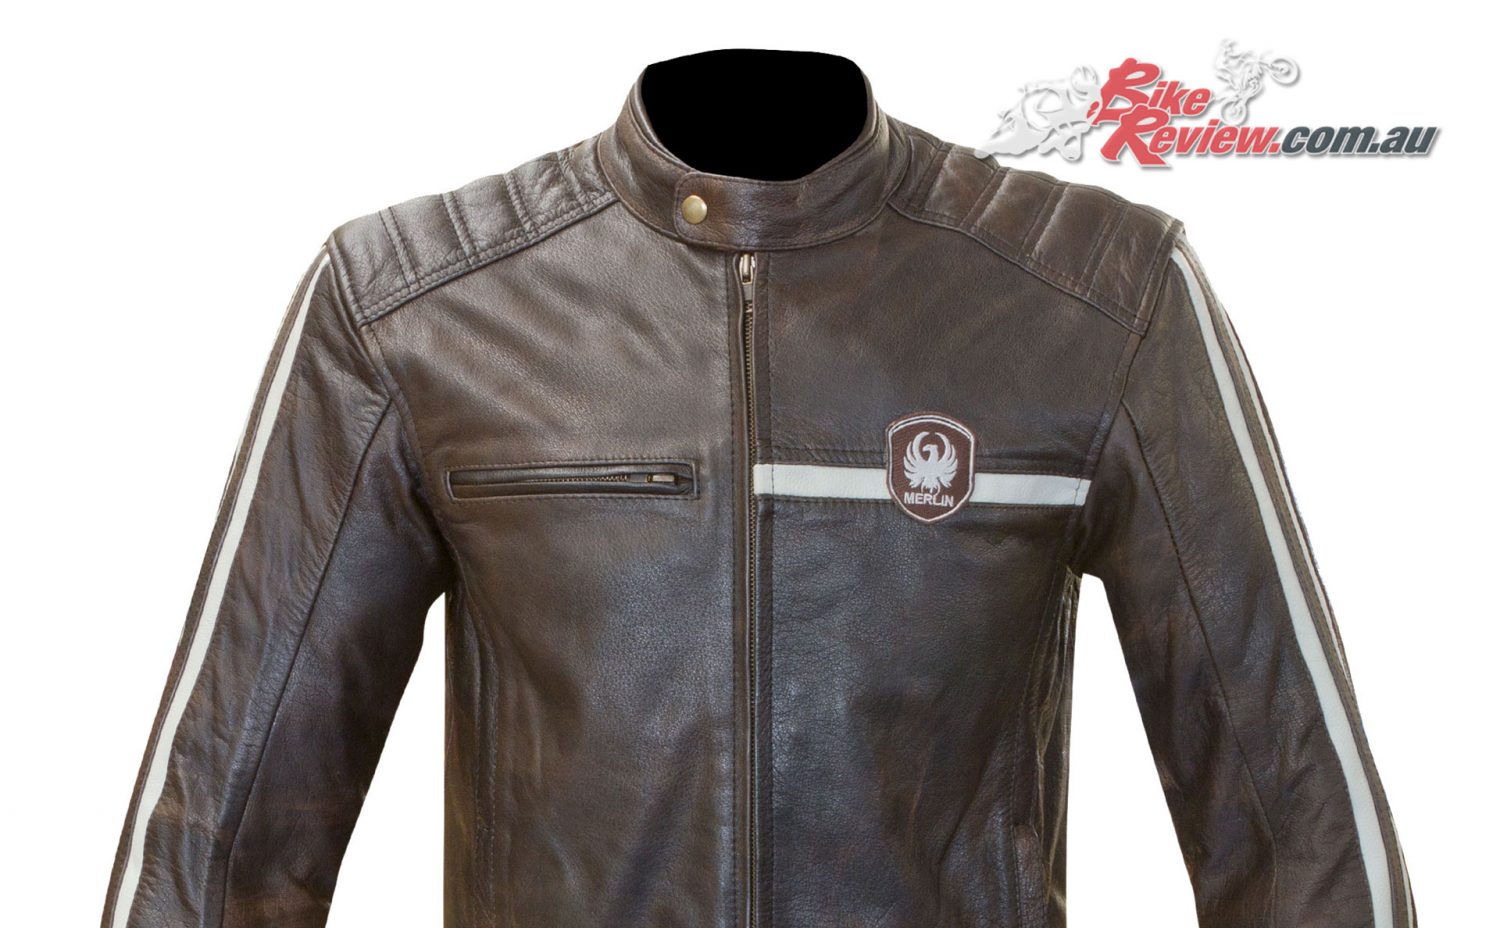 Merling Derrington Jacket available now in Oz for $499 RRP